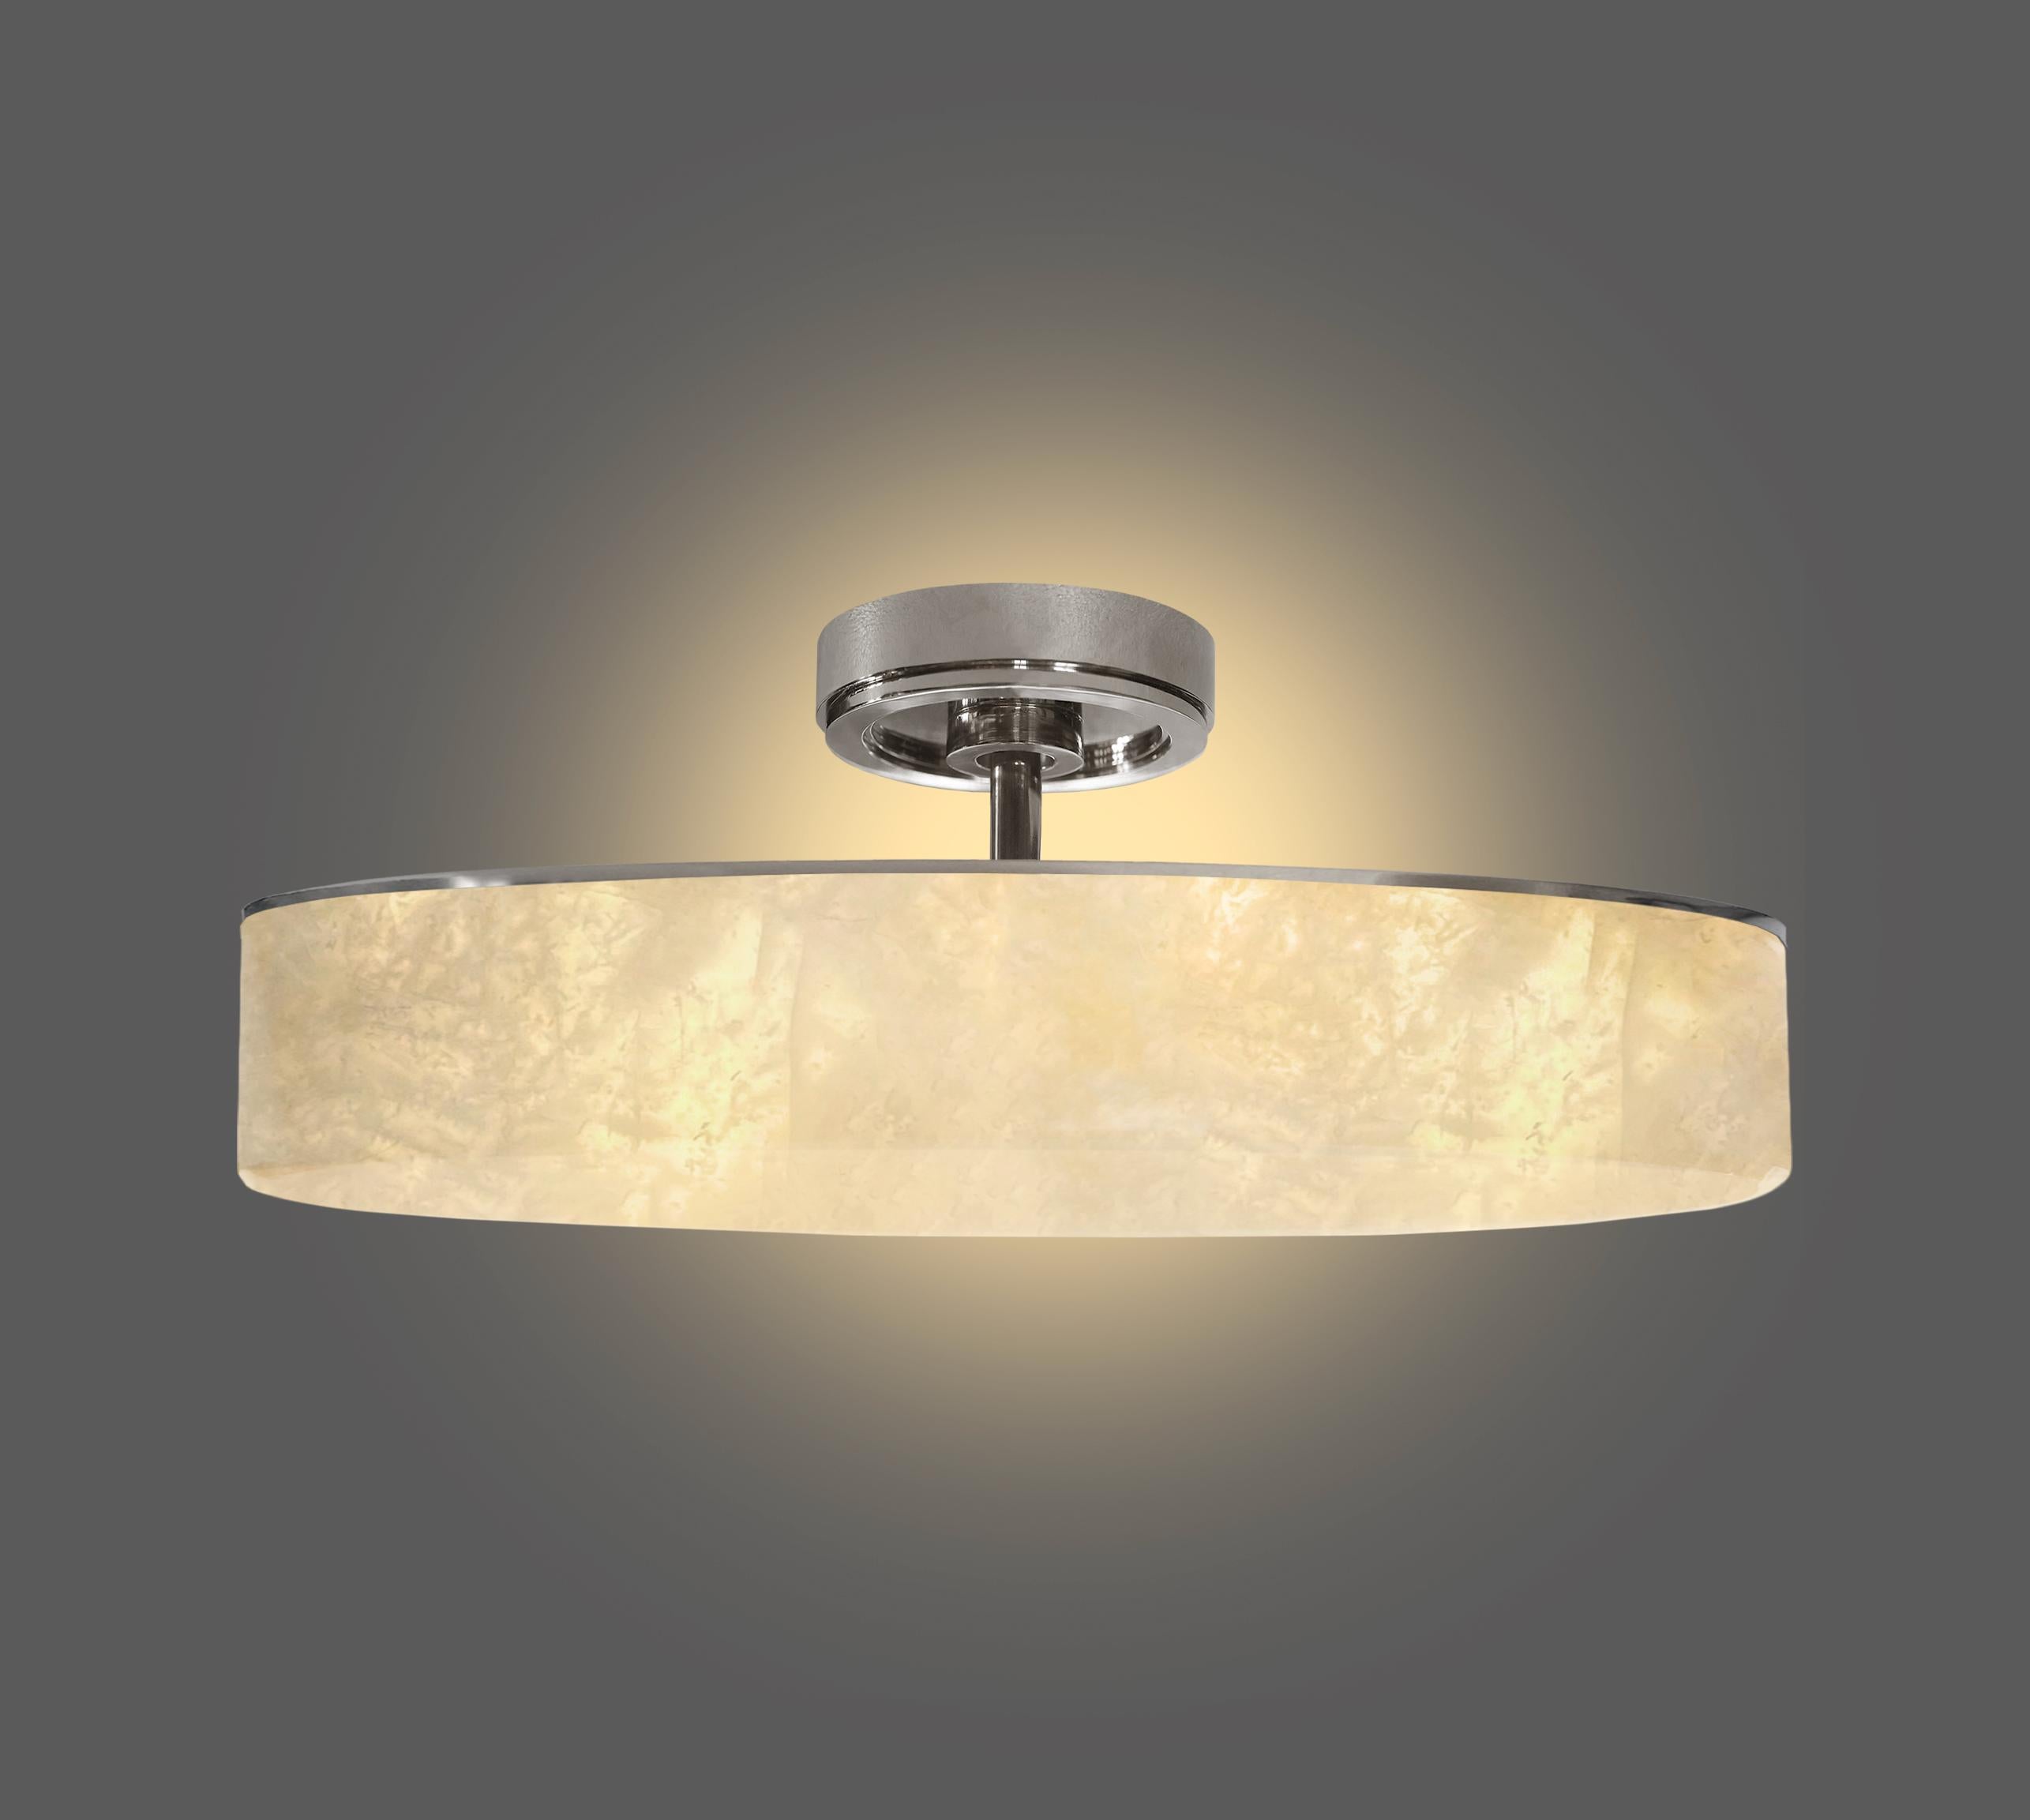 A rock crystal semi flush mount by Phoenix   Polished nickel finish.  Three E12 socket installed,180w total   Custom size and metal finish upon request